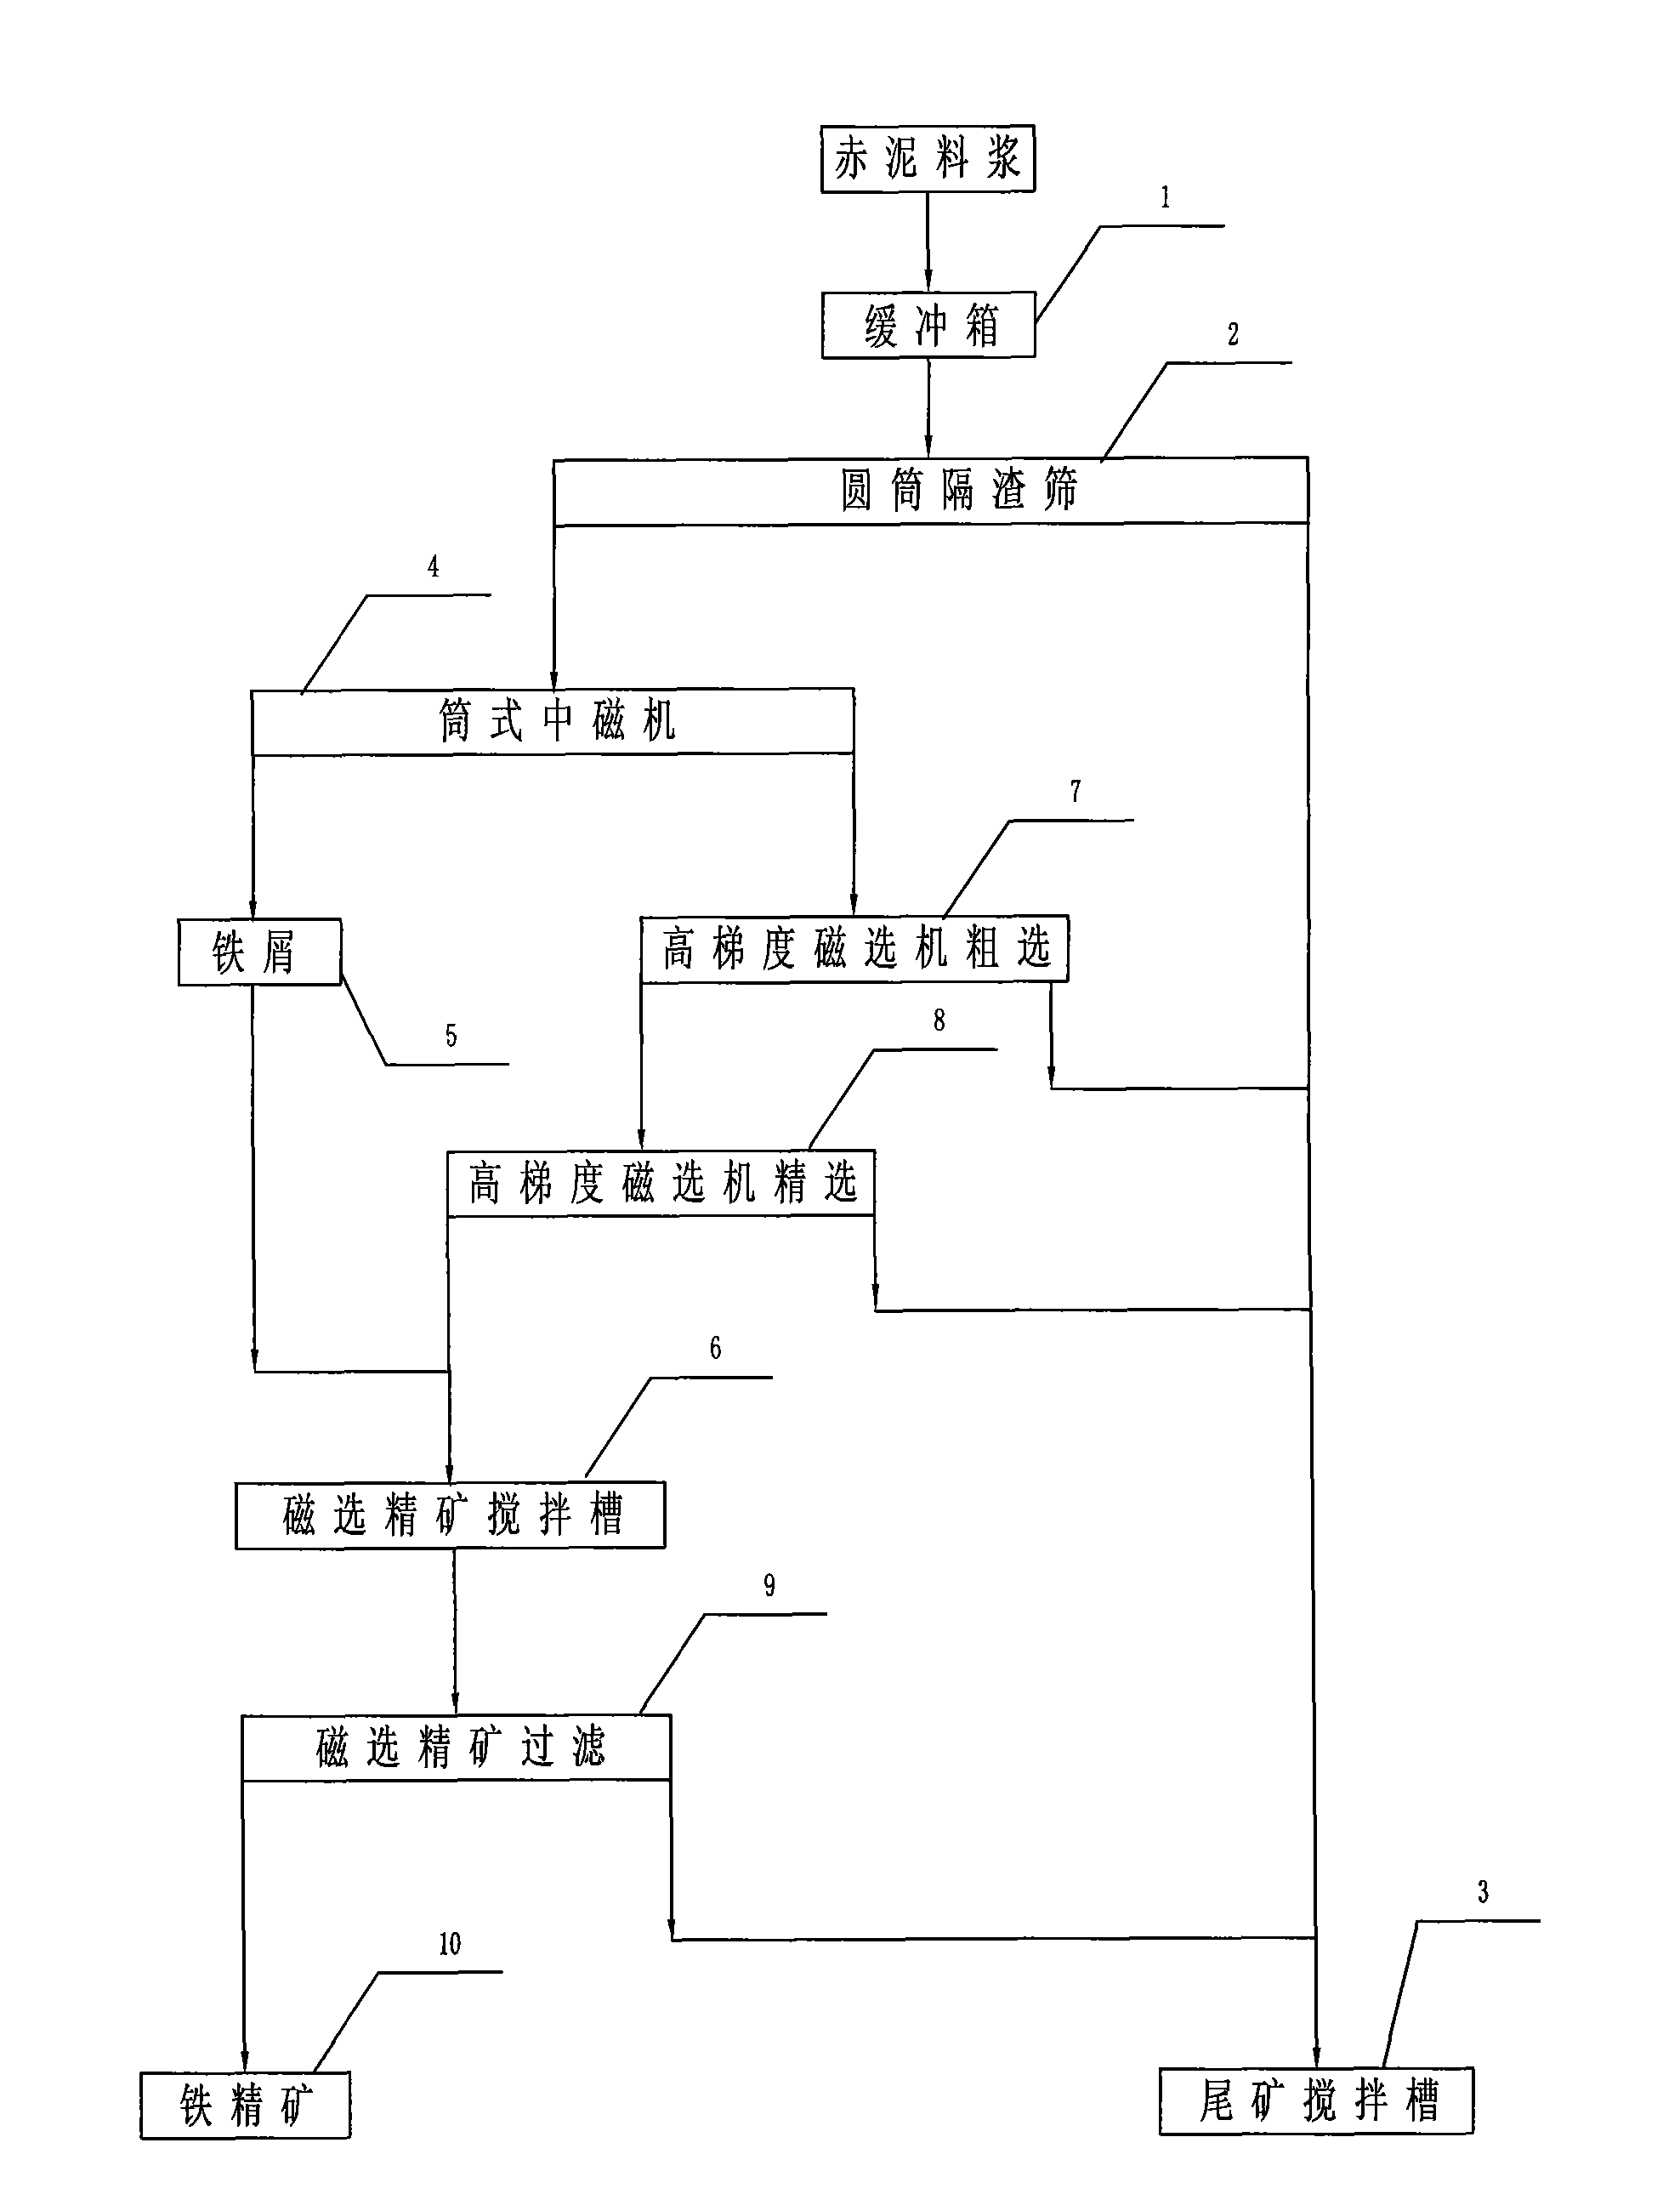 Method for recovering iron concentrates from alumina red mud